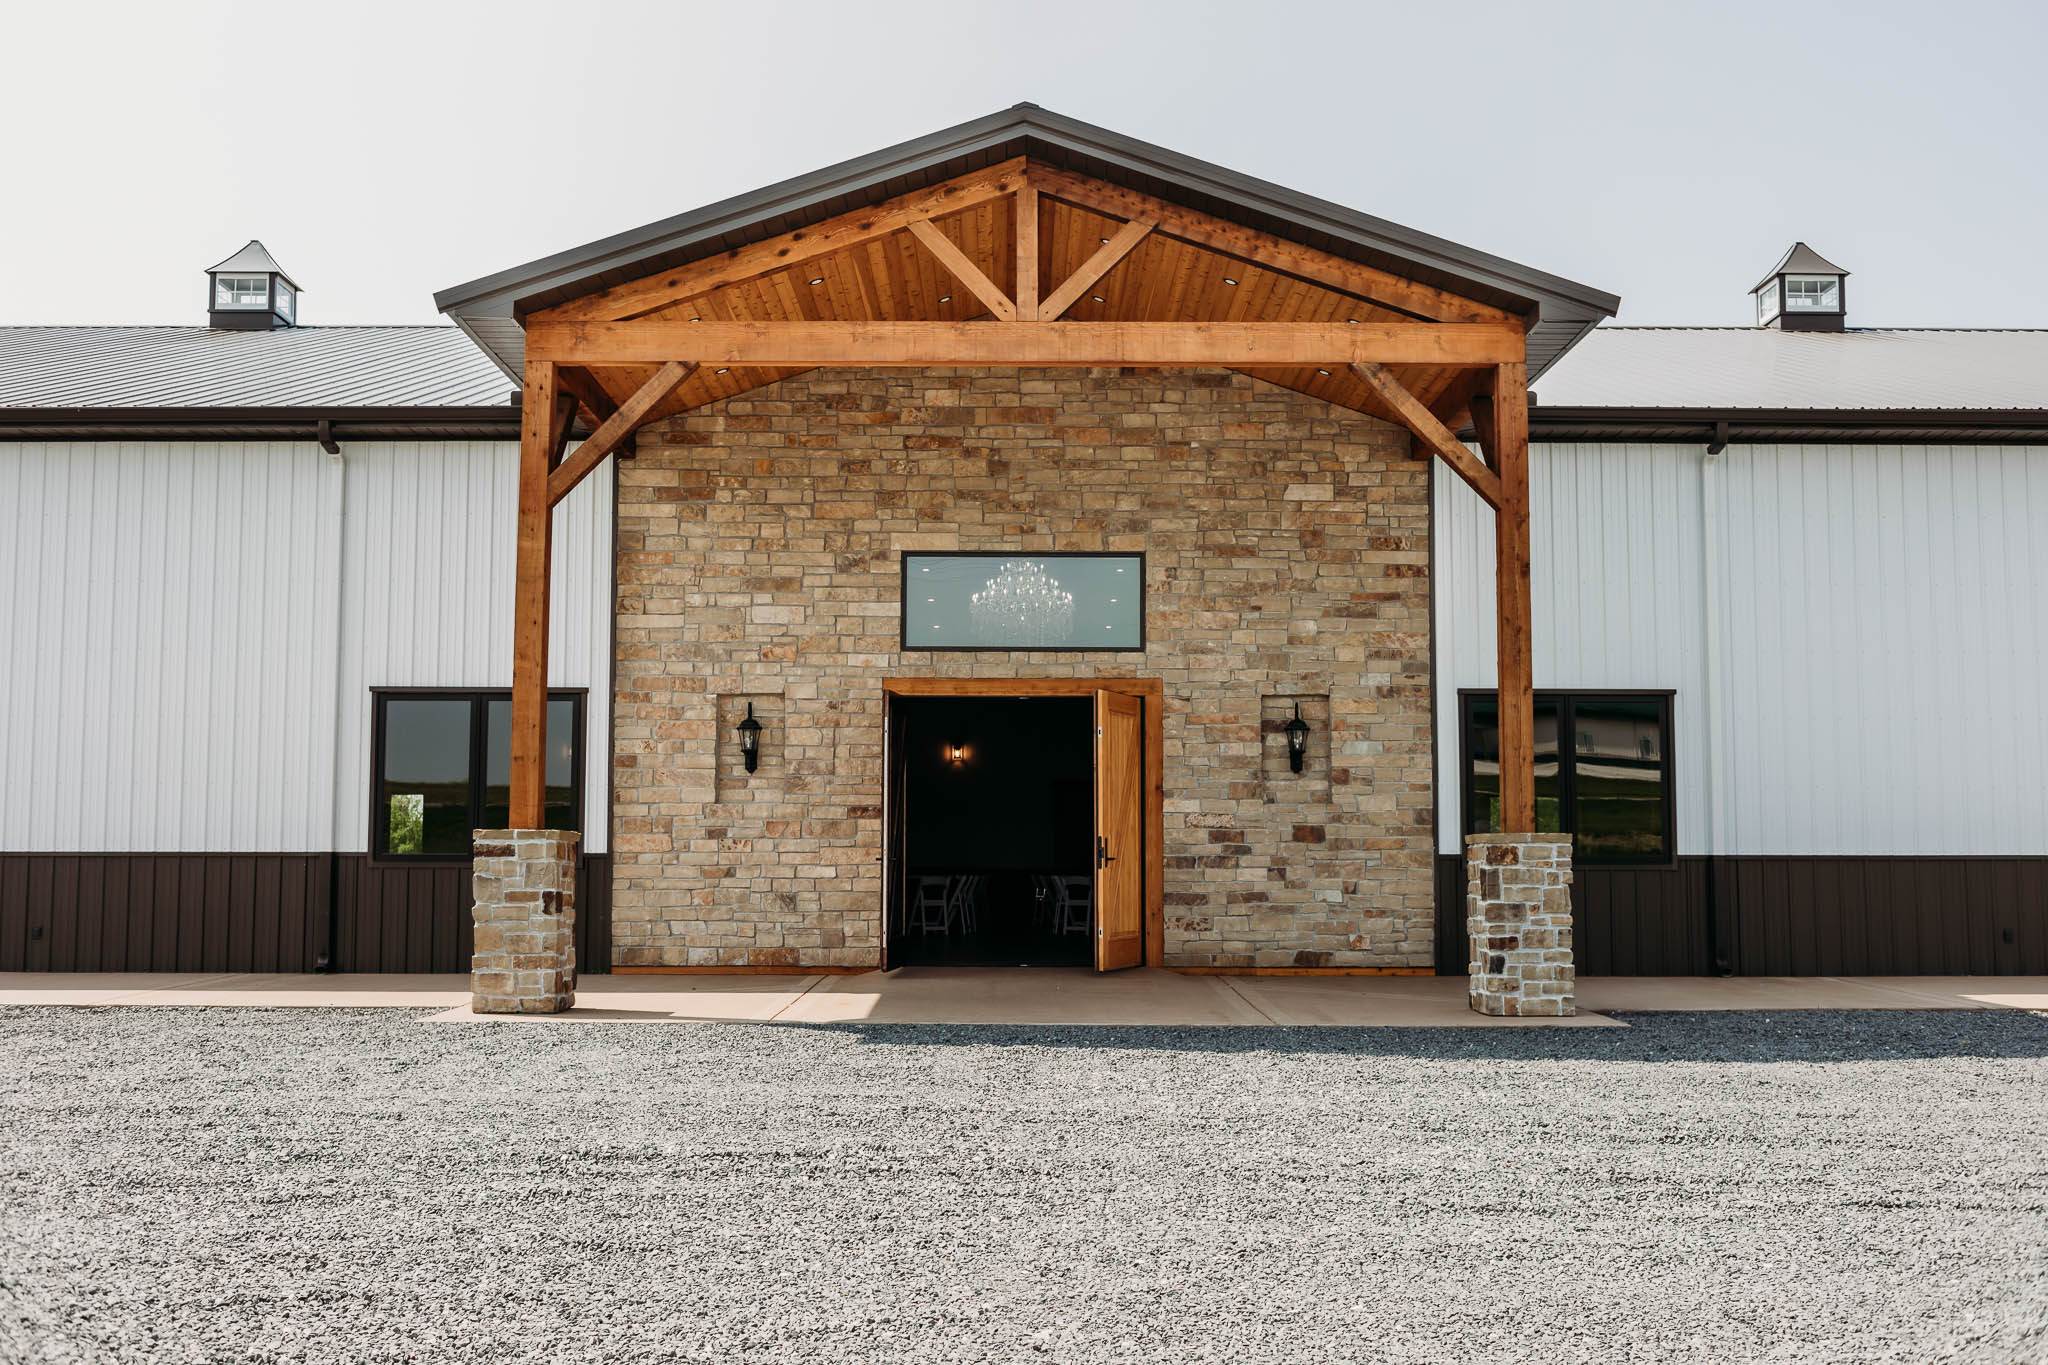 Front doors of The VeNue Event Space made of a large rock face with double-wide wood front doors. An awning hangs over the front door made of wood and black metal.